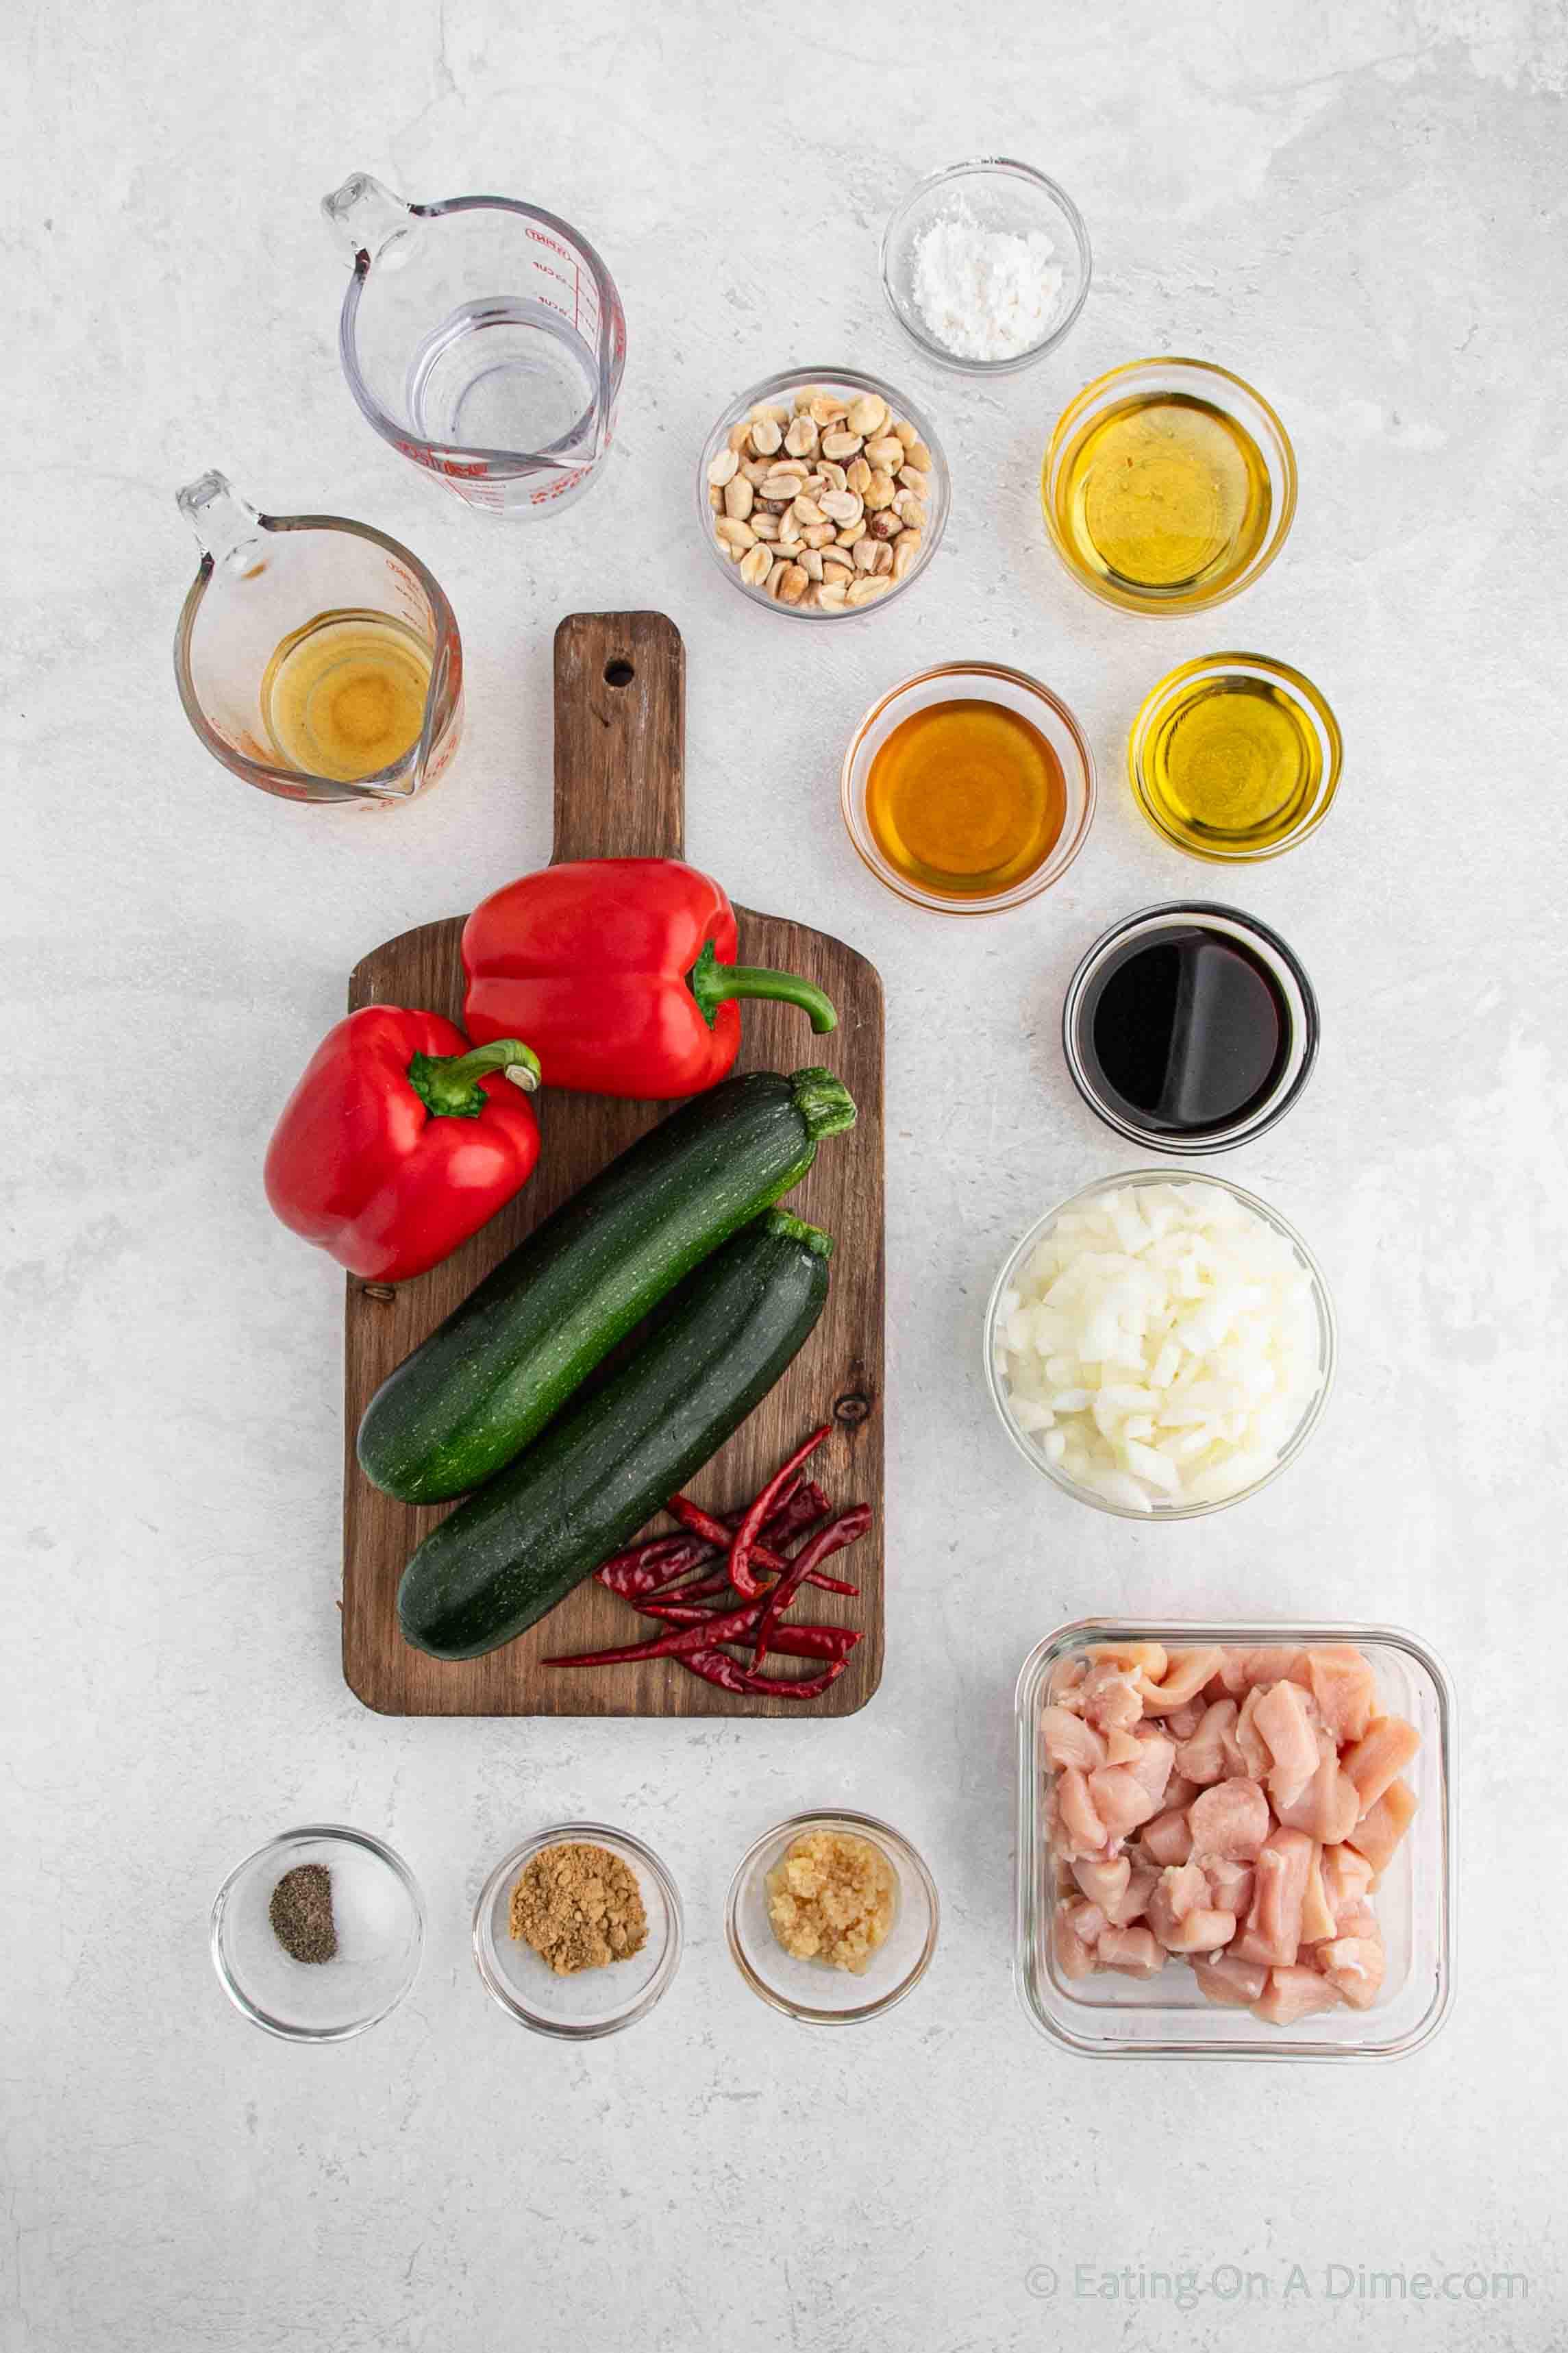 Kung Pao Chicken ingredients - chicken breasts, olive oil, soy sauce, sesame oil, water, rice vinegar, honey, onion, bell peppers, zucchini, garlic, ginger, pepper, salt, chili peppers, peanuts, cornstarch